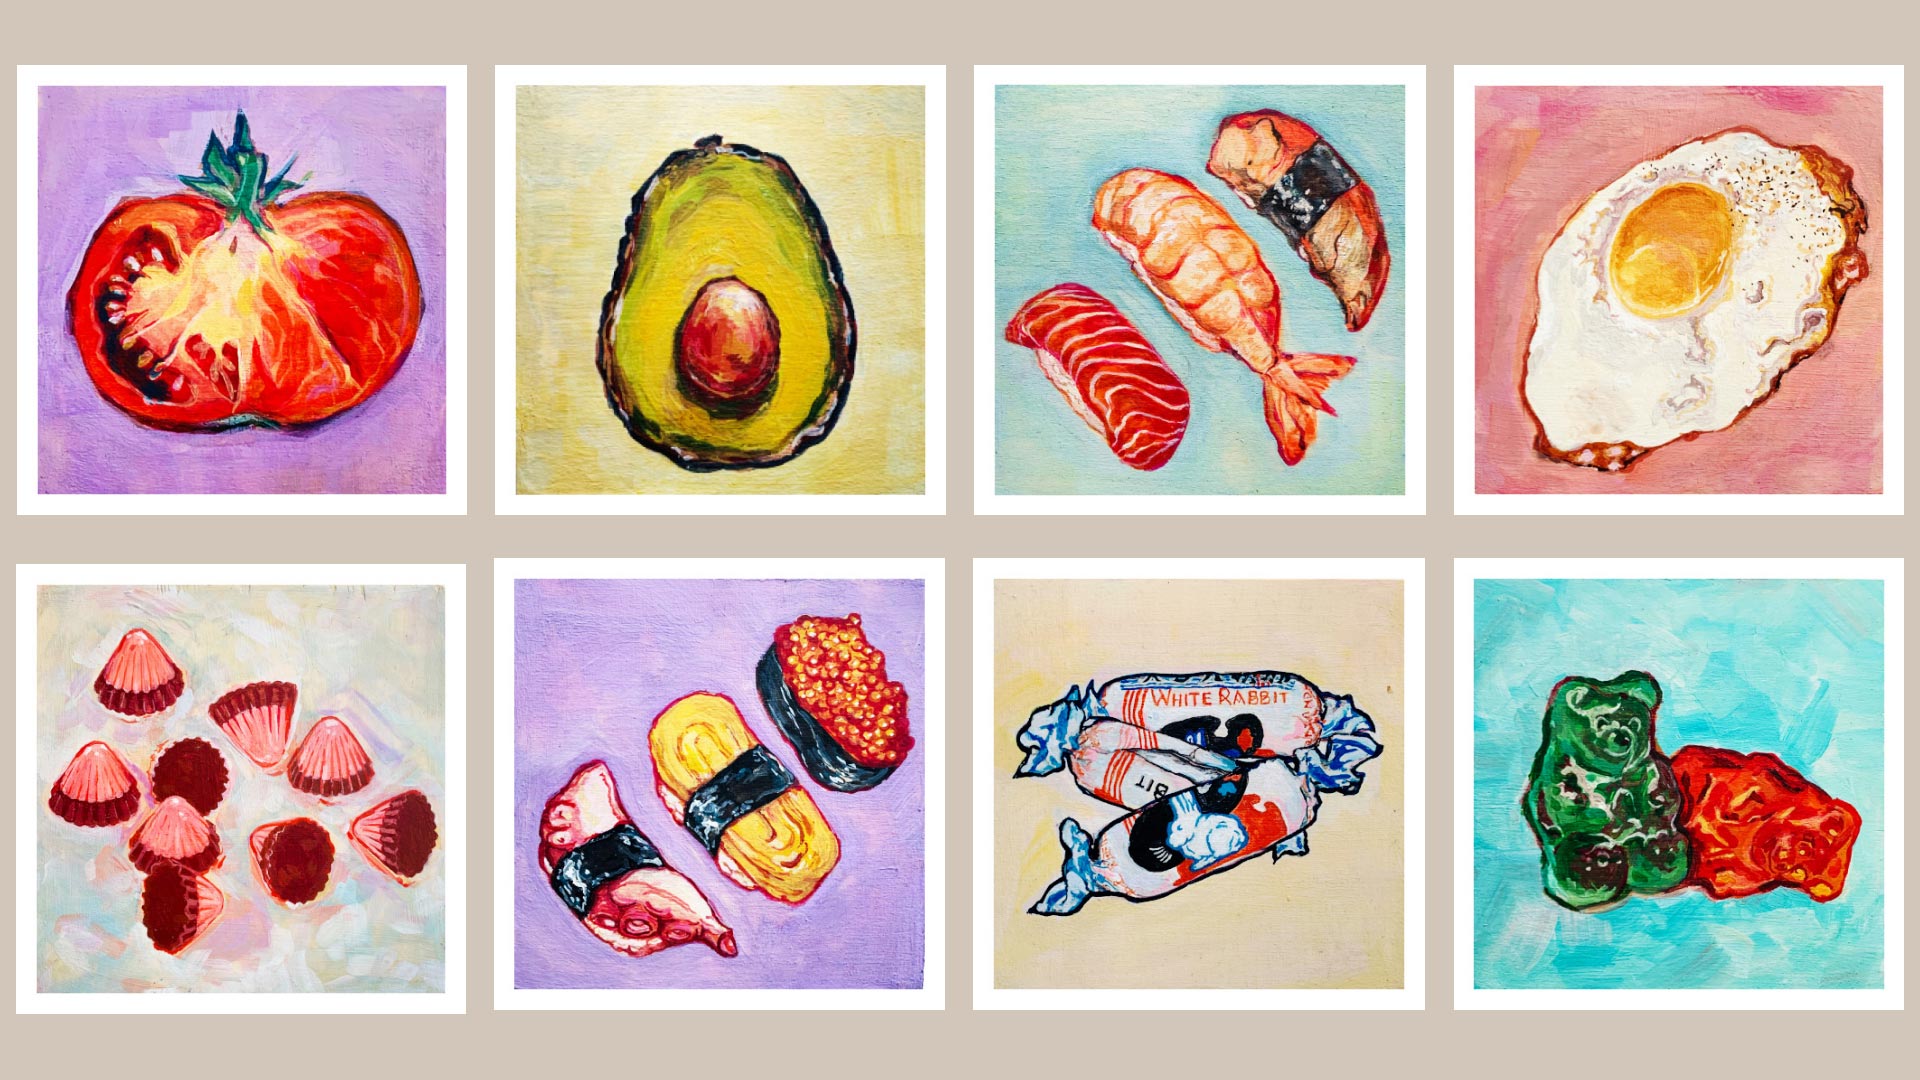 Square paintings of a half-cut tomato, a half-cut avocado, gummy bears, chocolates, two sets of nigiri, rabbit candies and a fried egg.